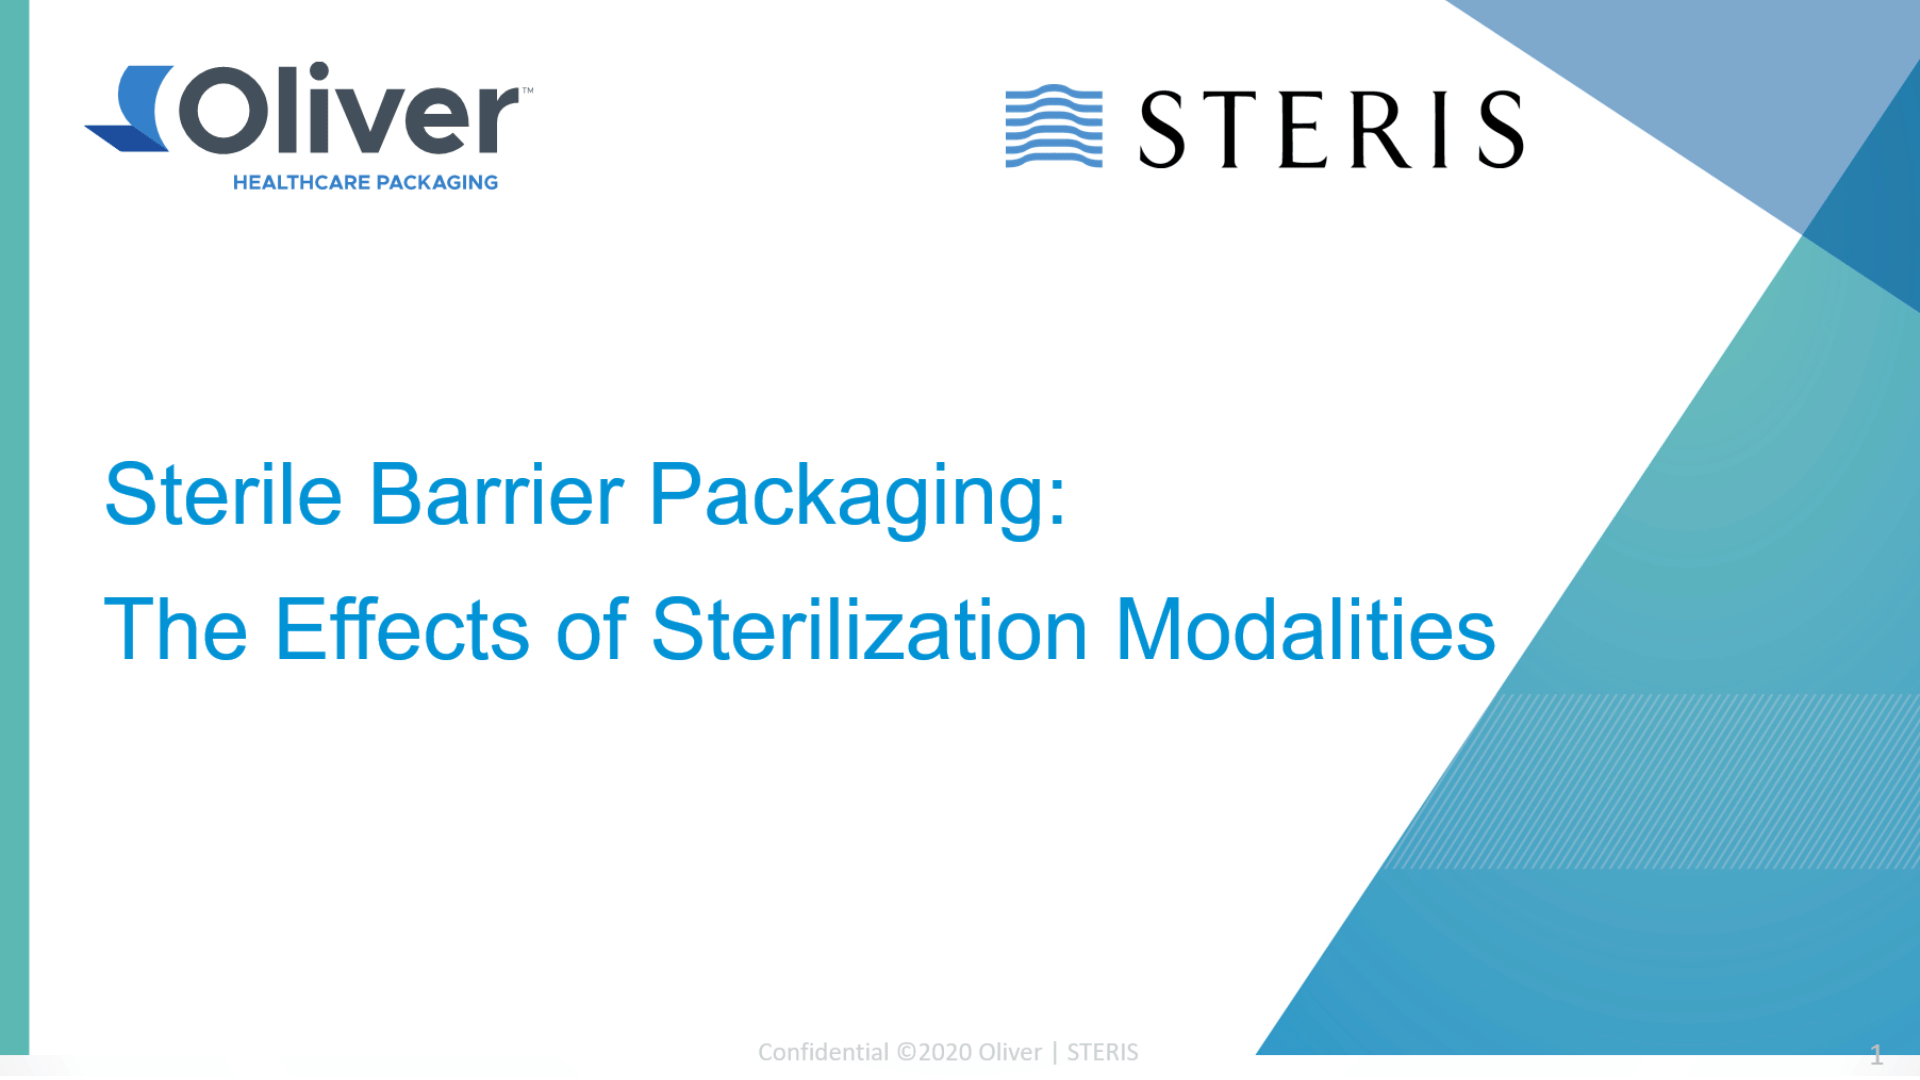 Sterile Barrier Packaging: The Effects of Sterilization Modalities